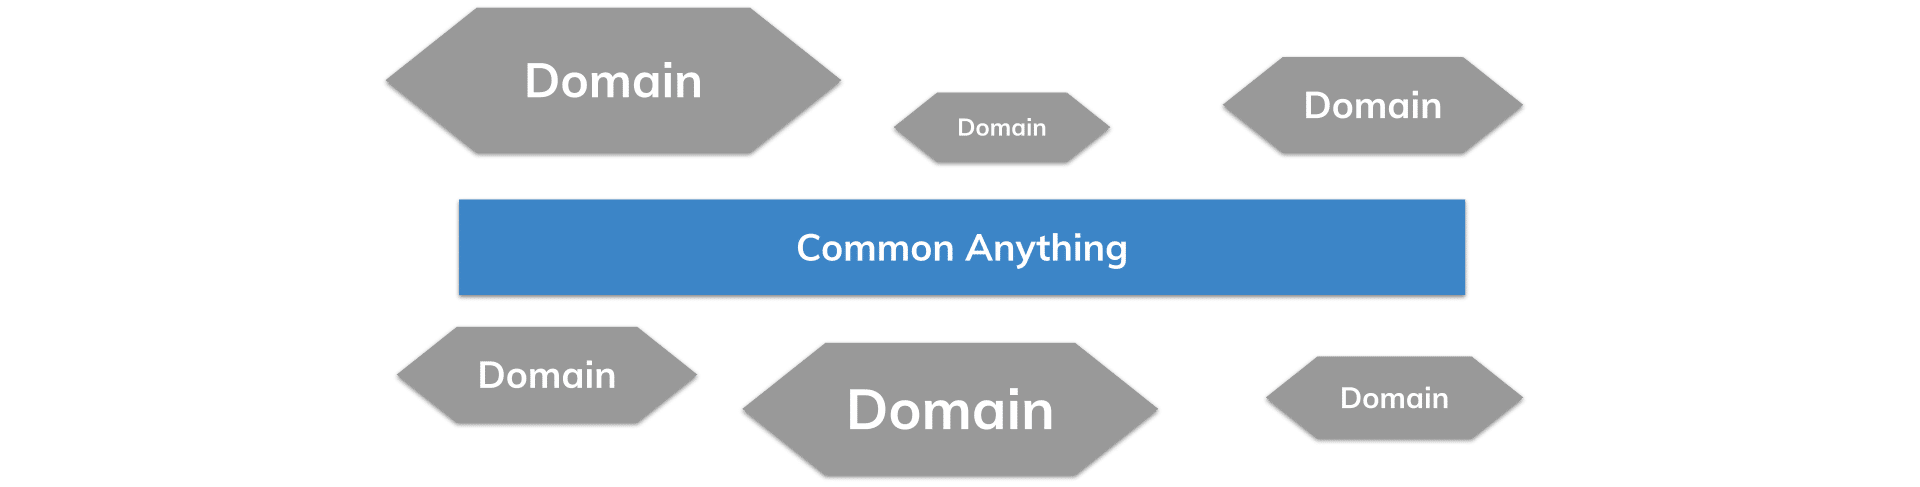 Diagram to represent data mesh organizational architecture with domain importance.